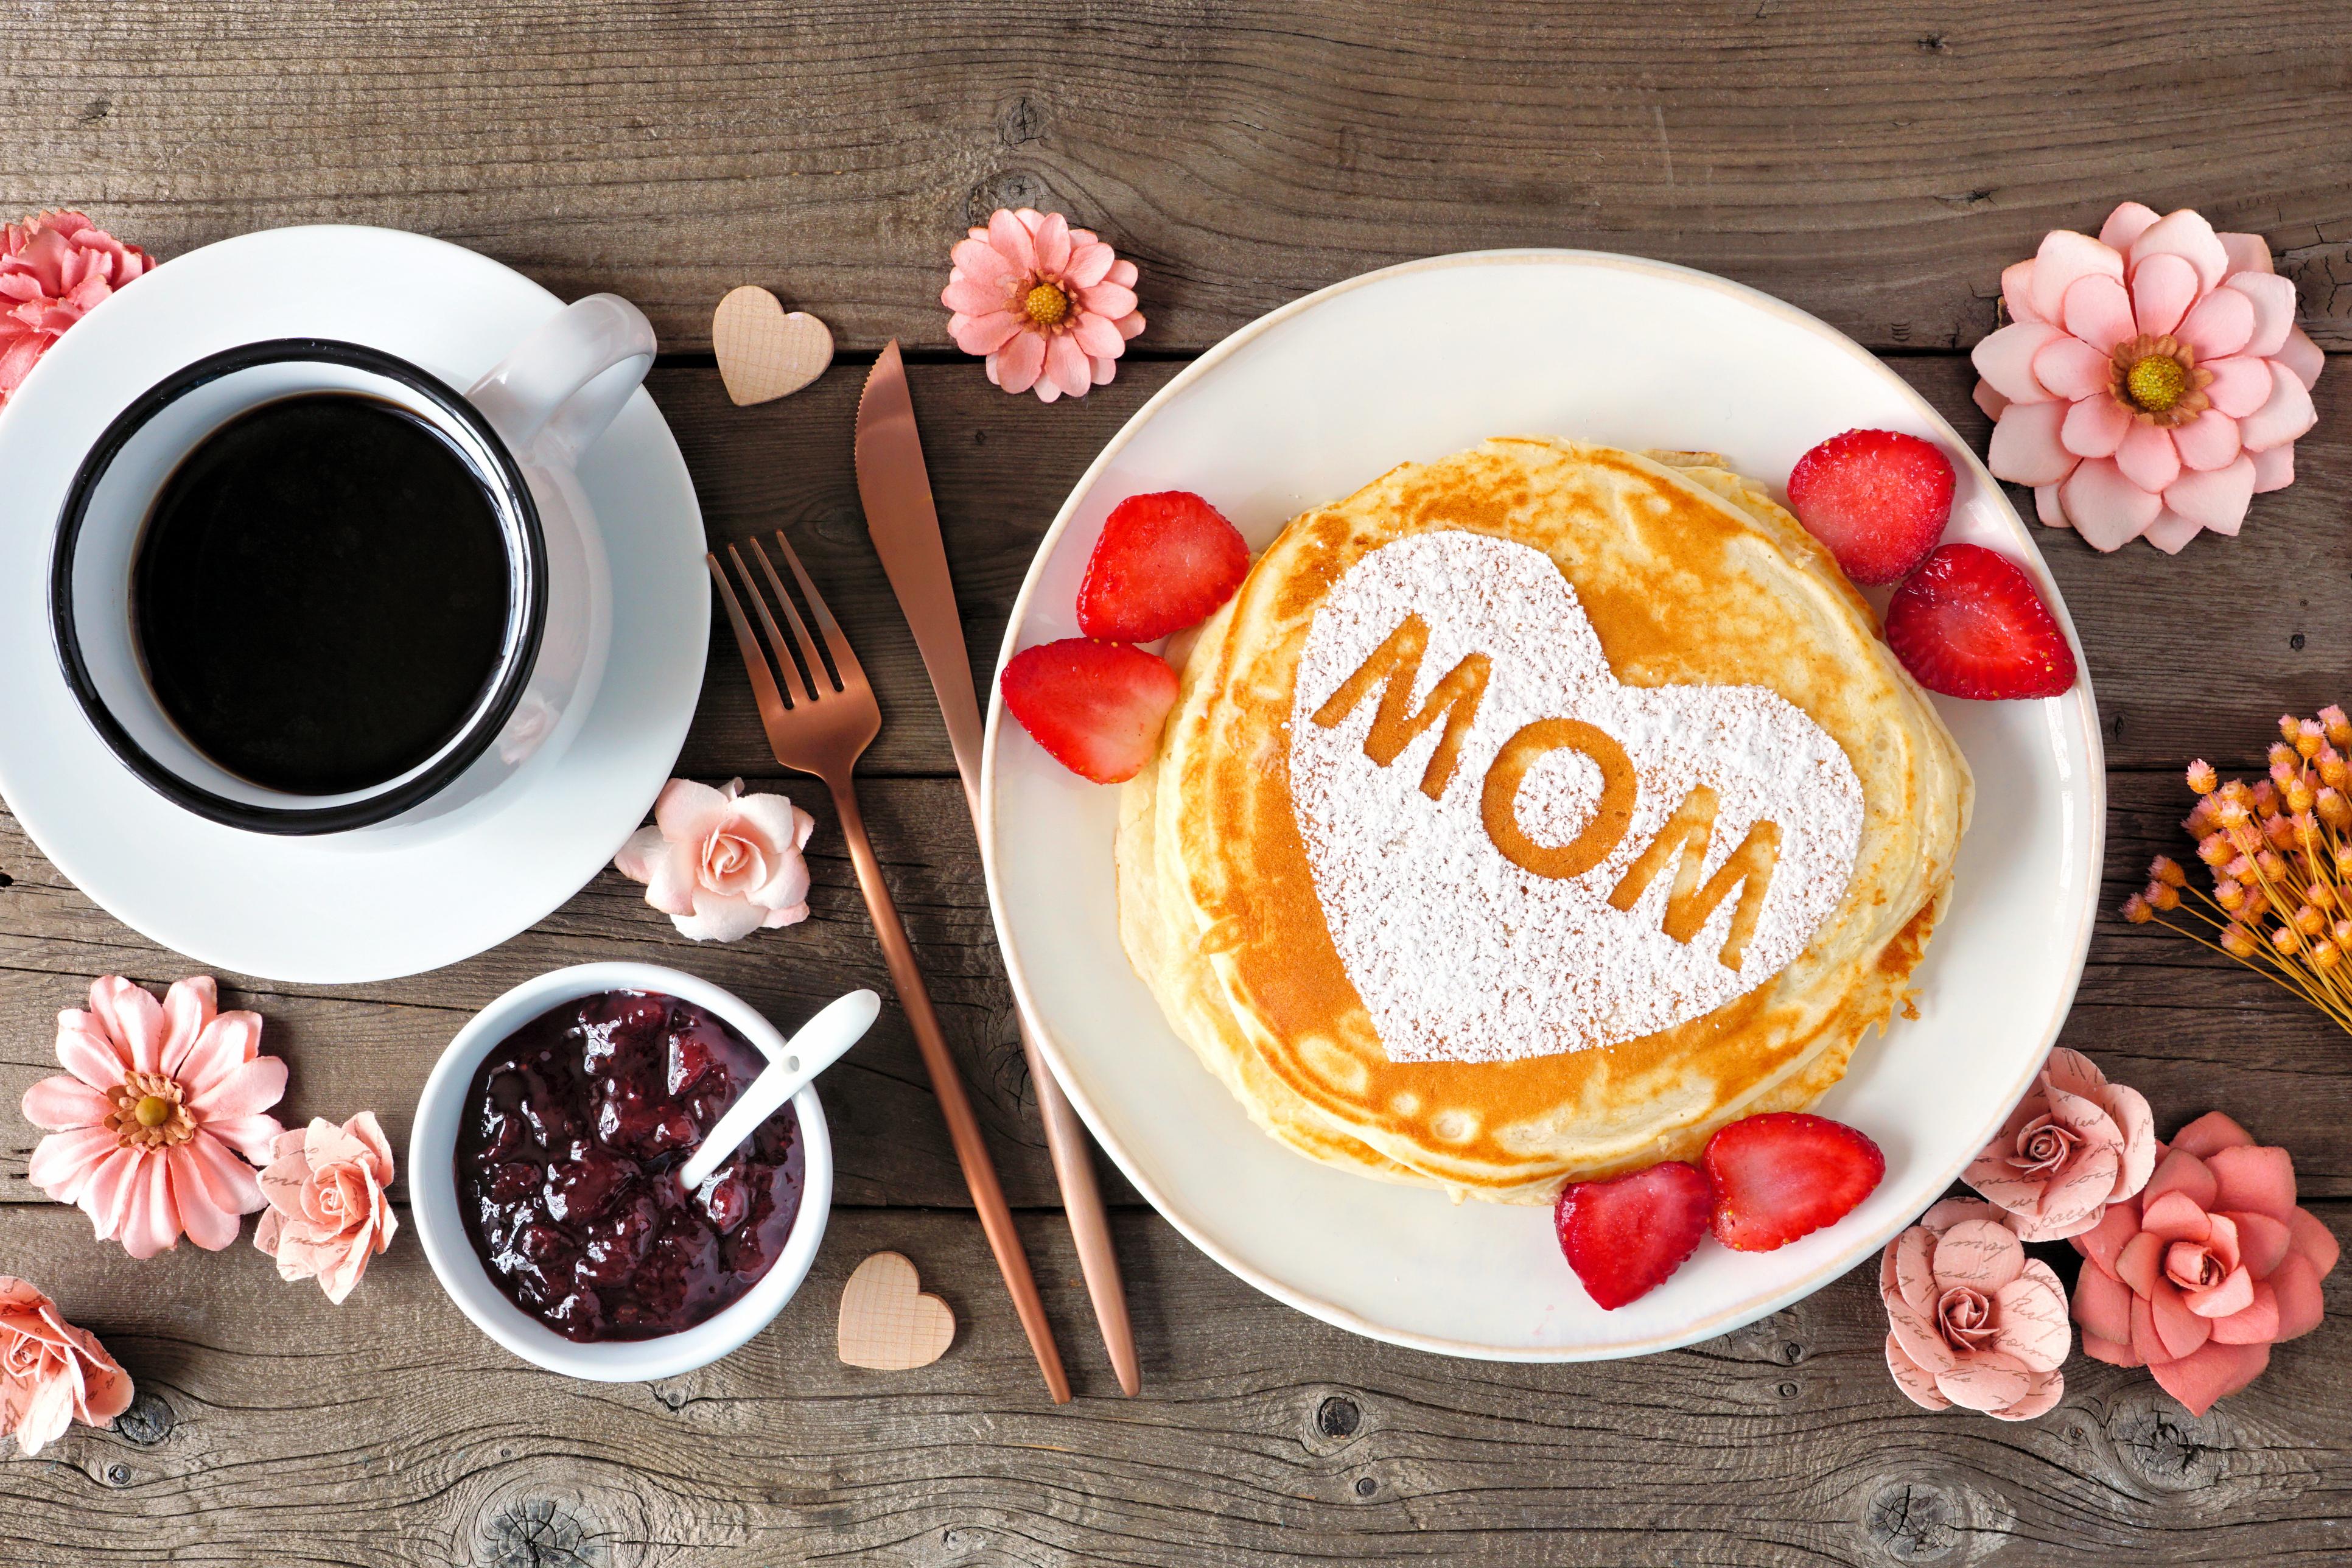 Mother's Day Brunch Near Me: The Best Takeout Specials for Mom